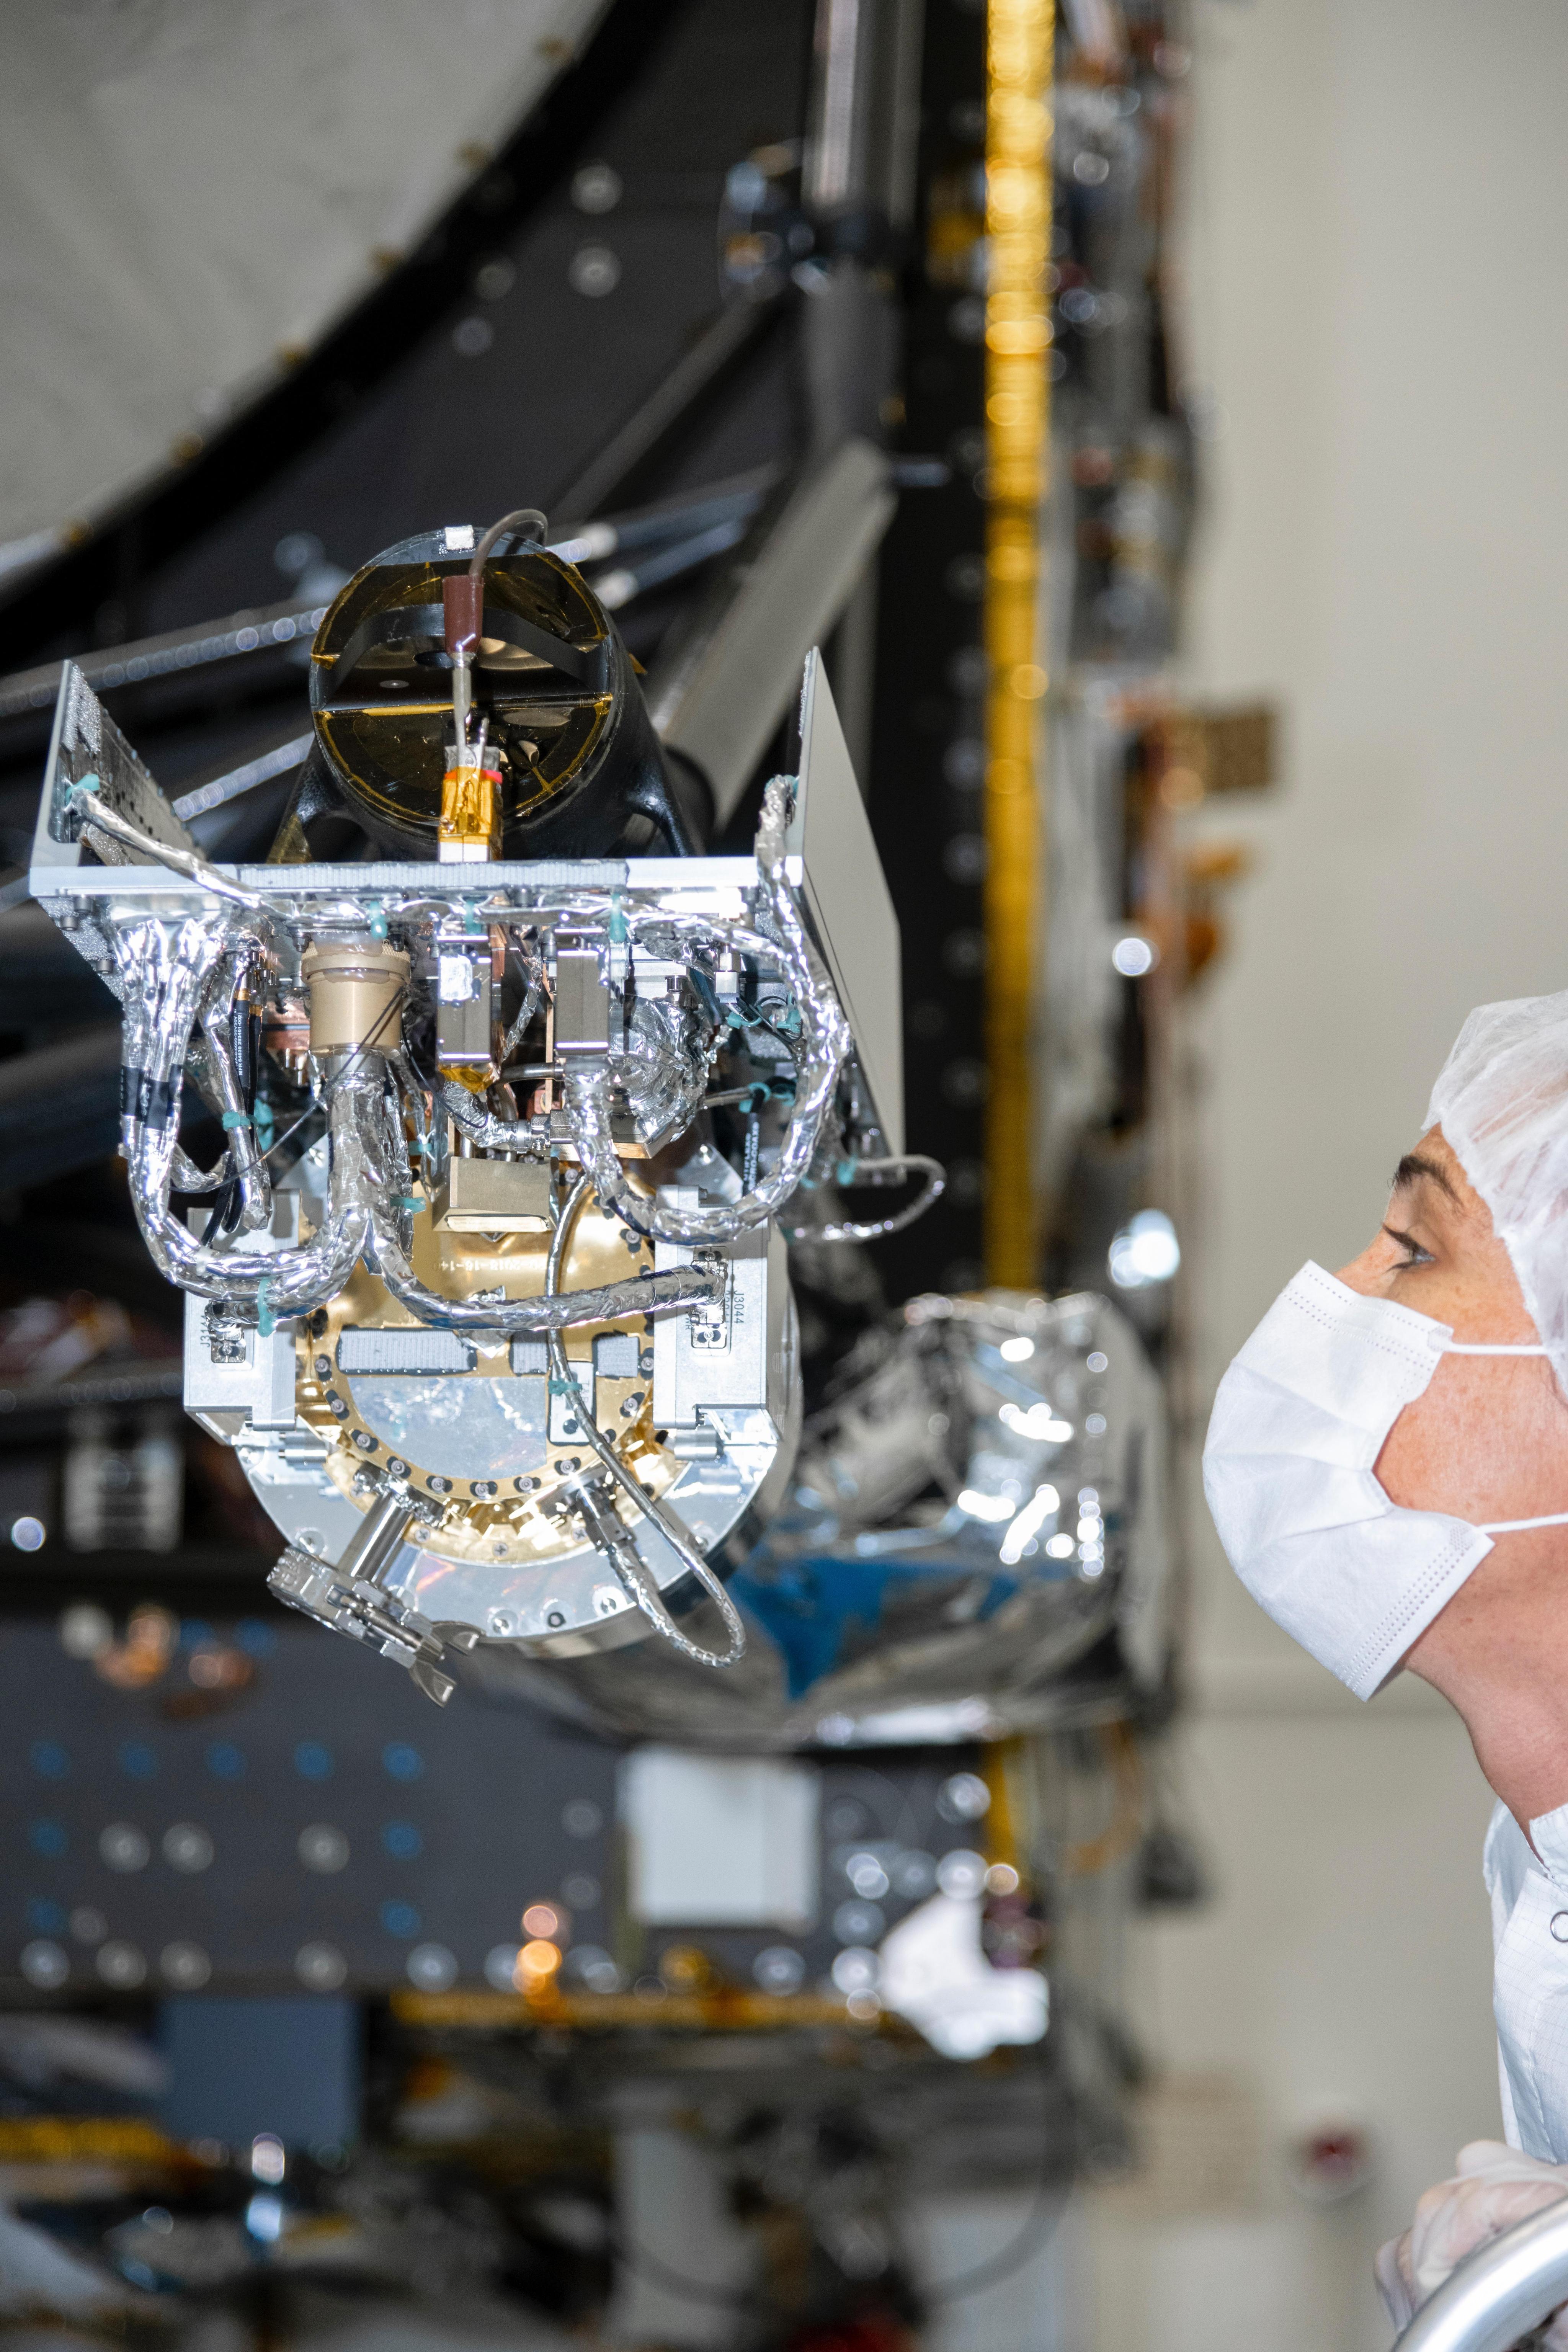 An engineer wearing a mask and head covering looks a spacecraft instrument with lots of wires visible.